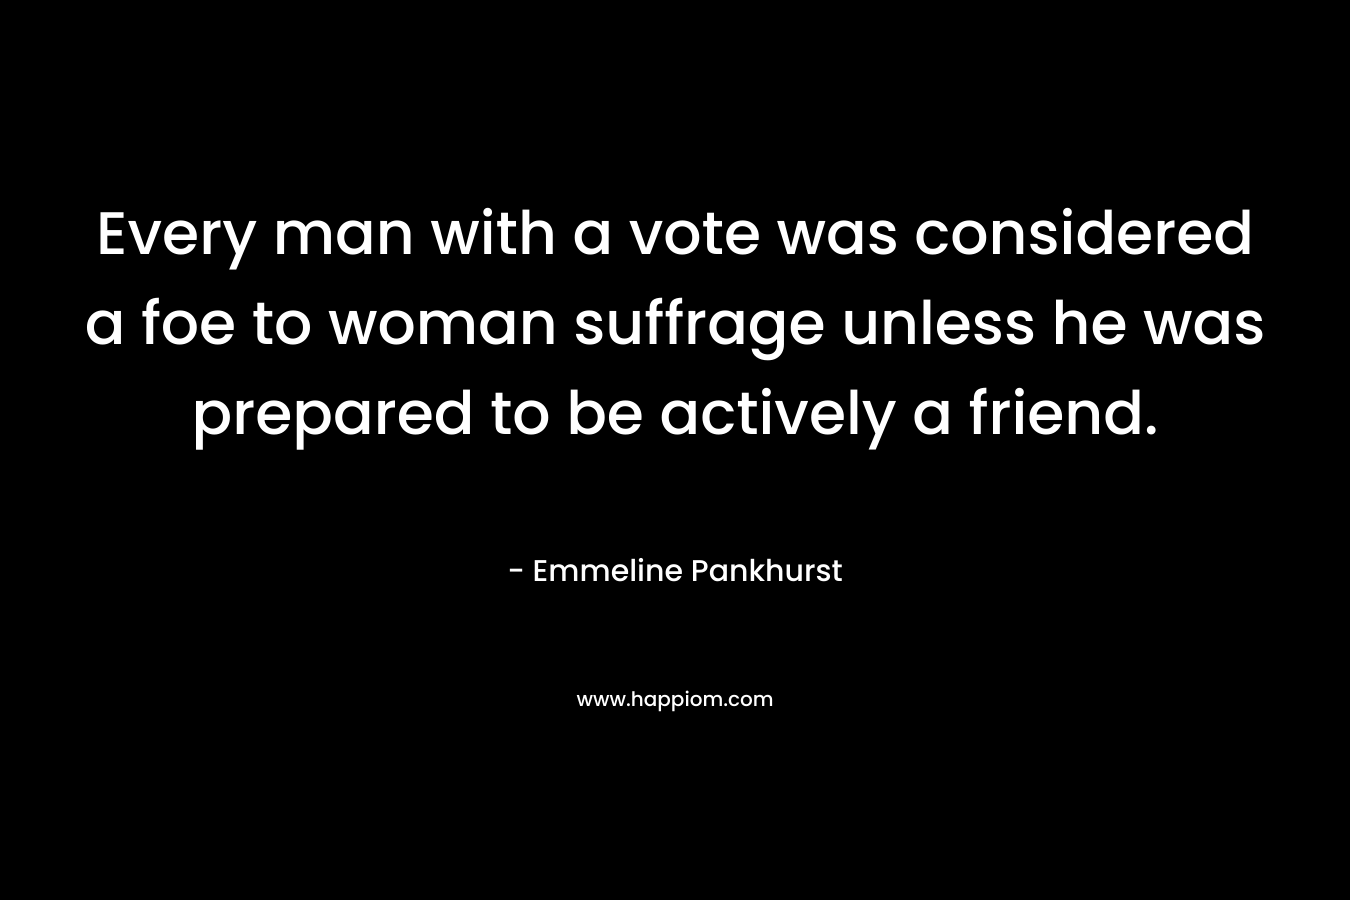 Every man with a vote was considered a foe to woman suffrage unless he was prepared to be actively a friend.